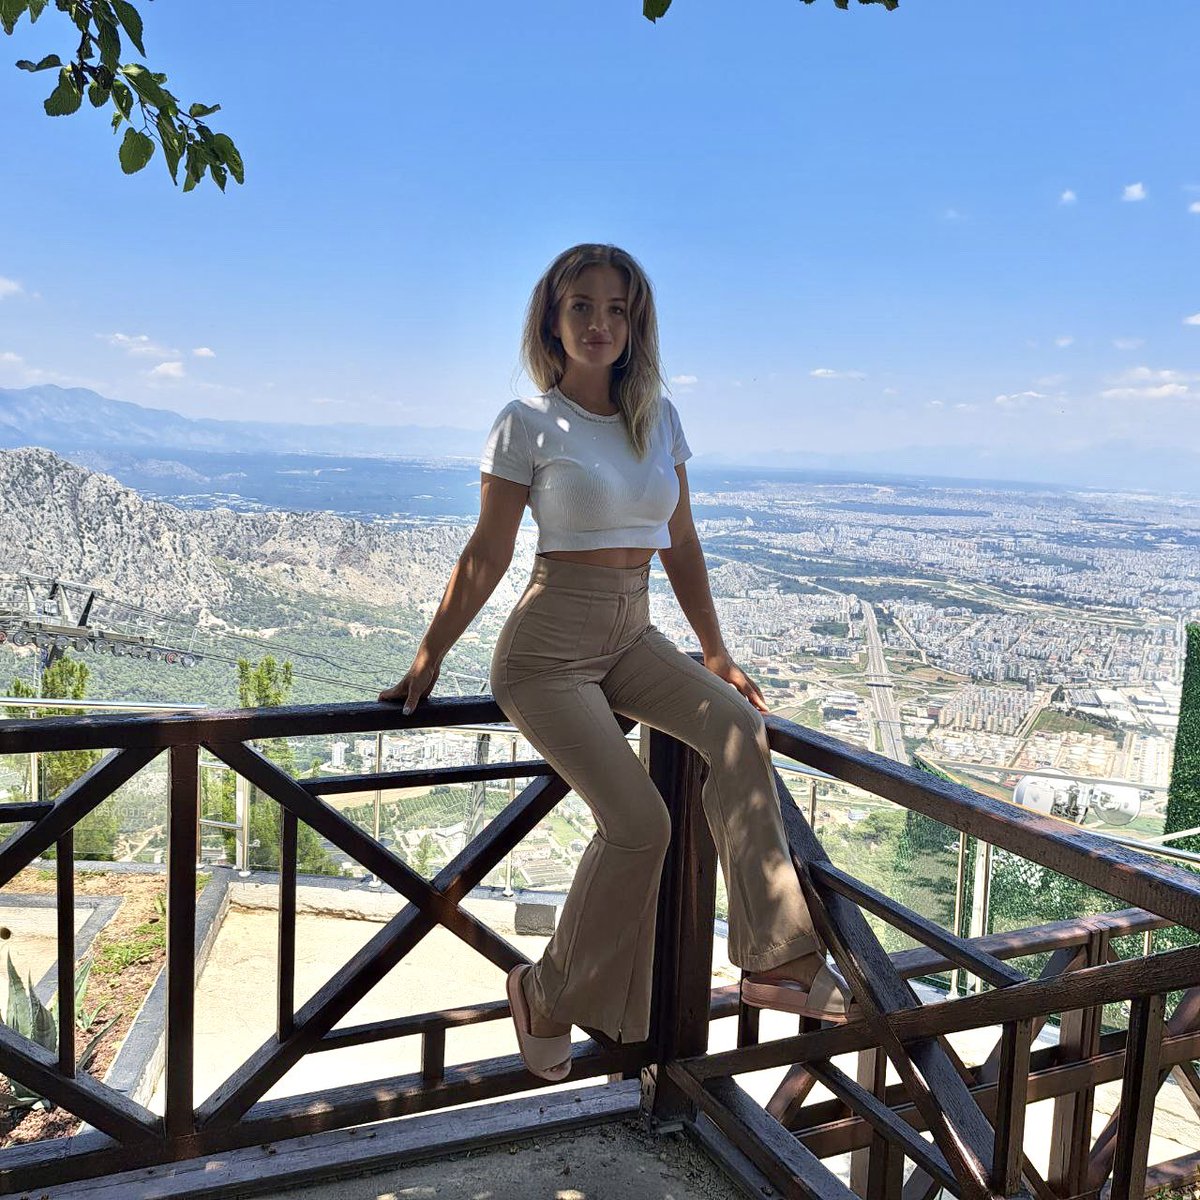 Beautiful Antalya from a height of 600 m. 

#antalyaturkey #antalya #mountains #mountain #turkey #turkey🇹🇷 #turkeytravel #landscape #landscapes  #travel #girl